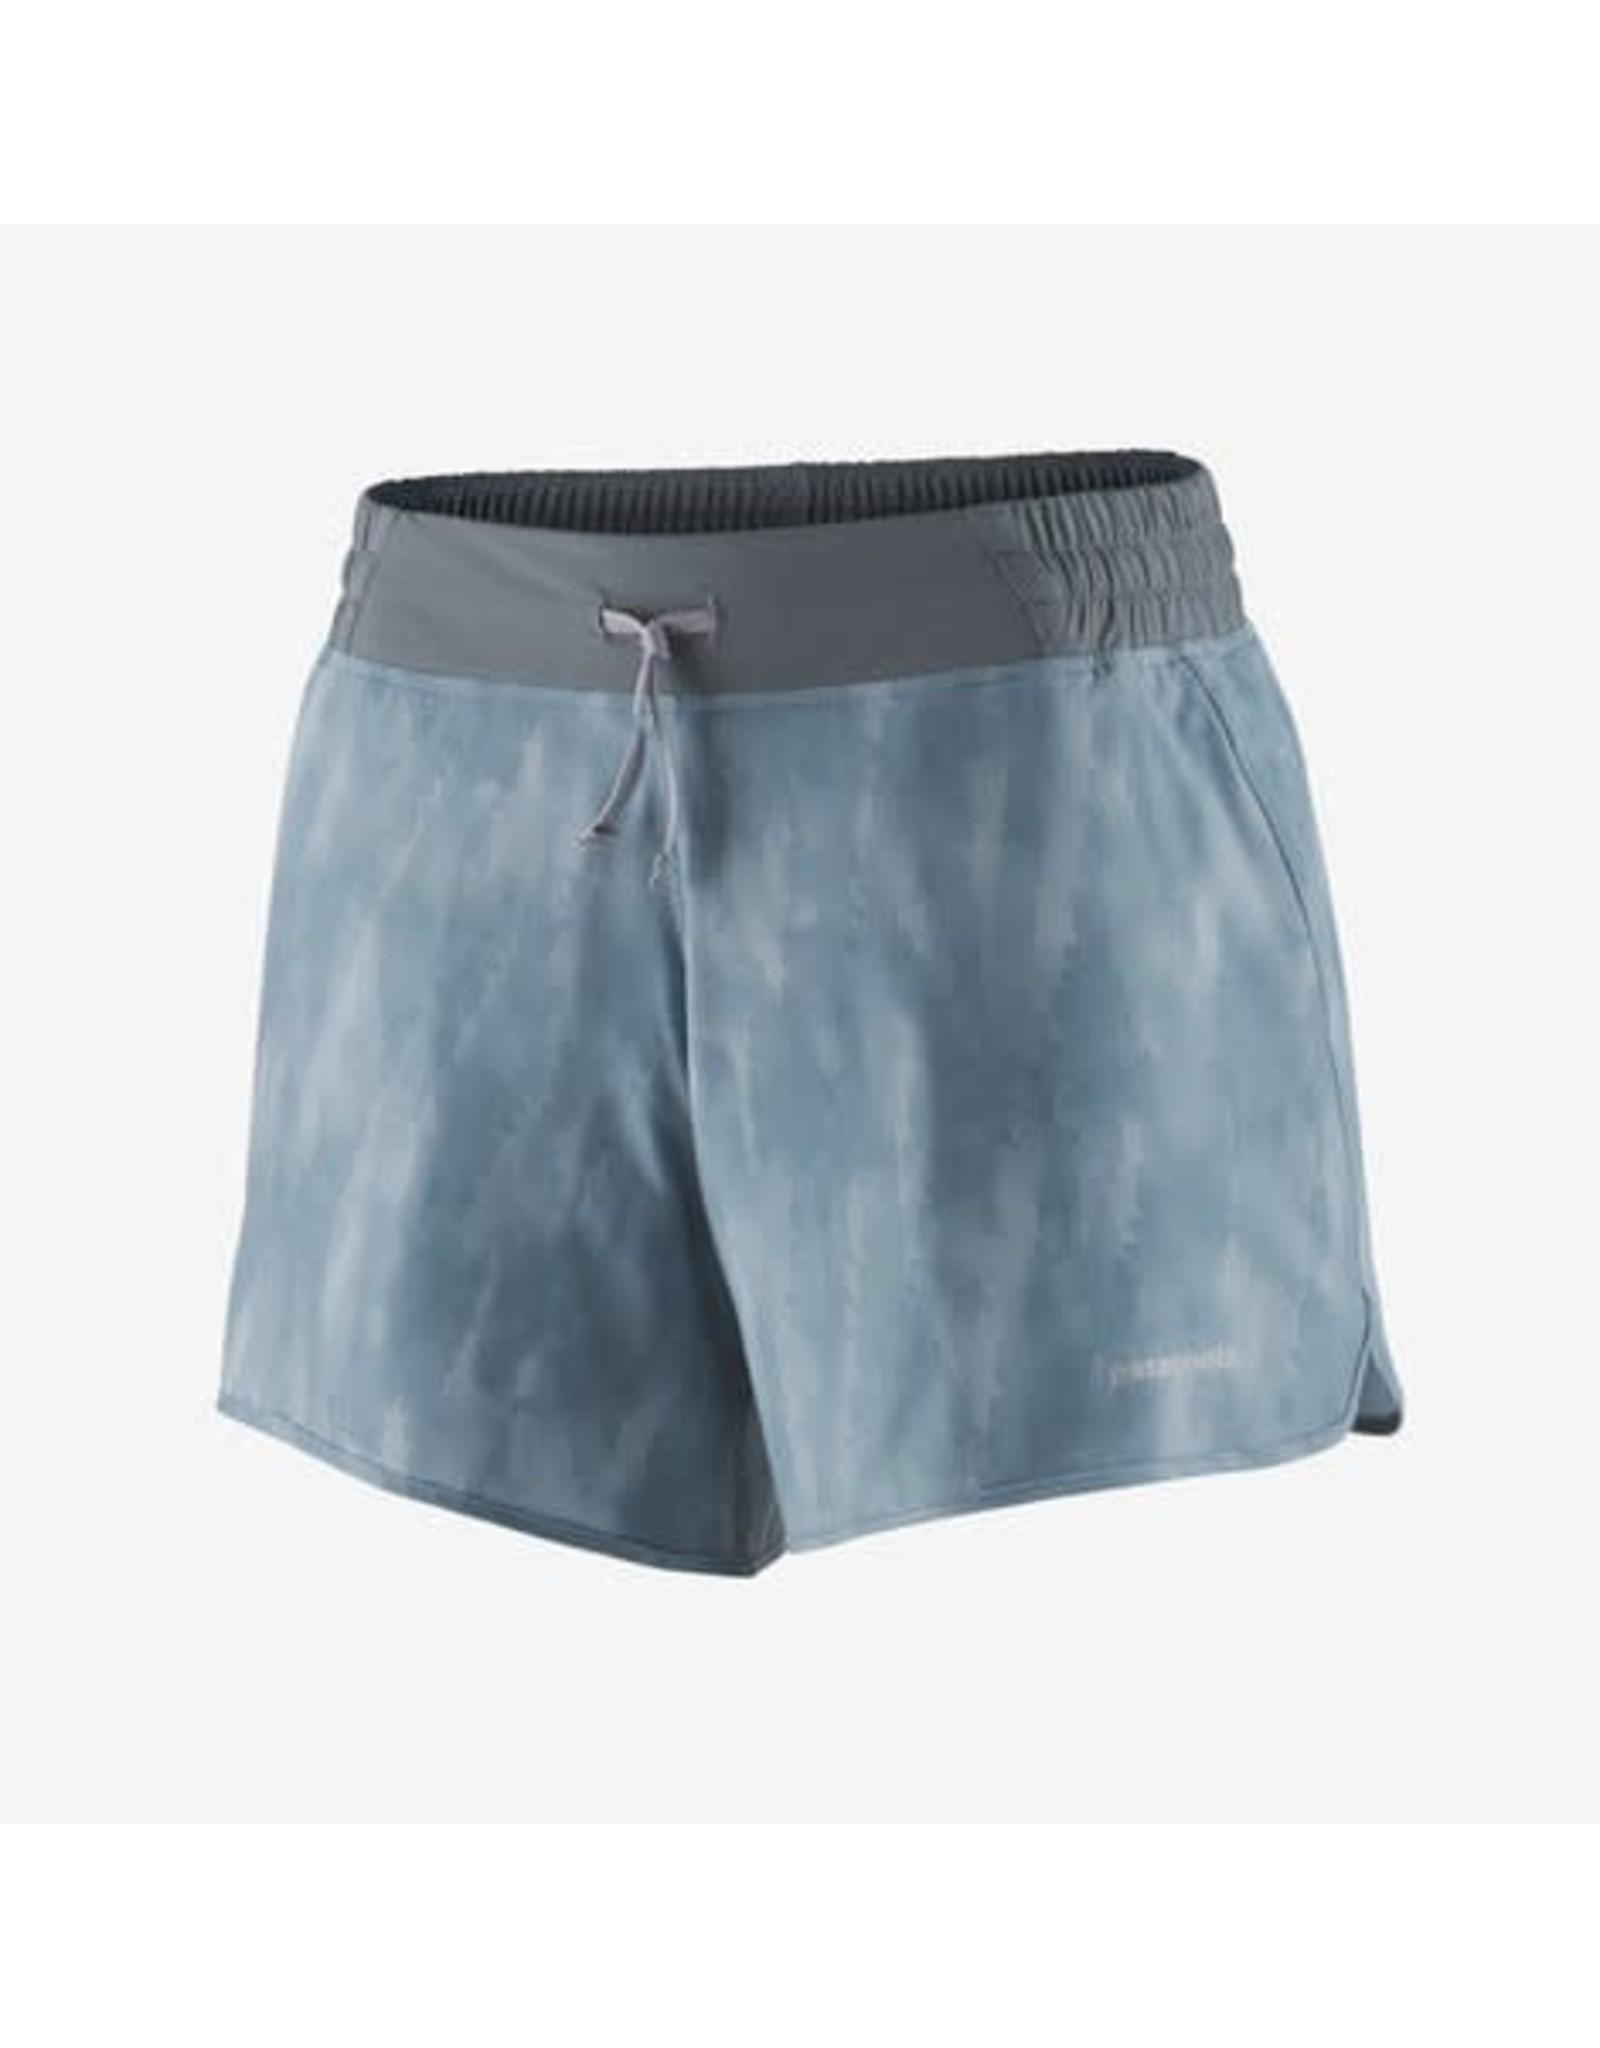 Patagonia Patagonia W's Nine Trails Shorts - 6 in.